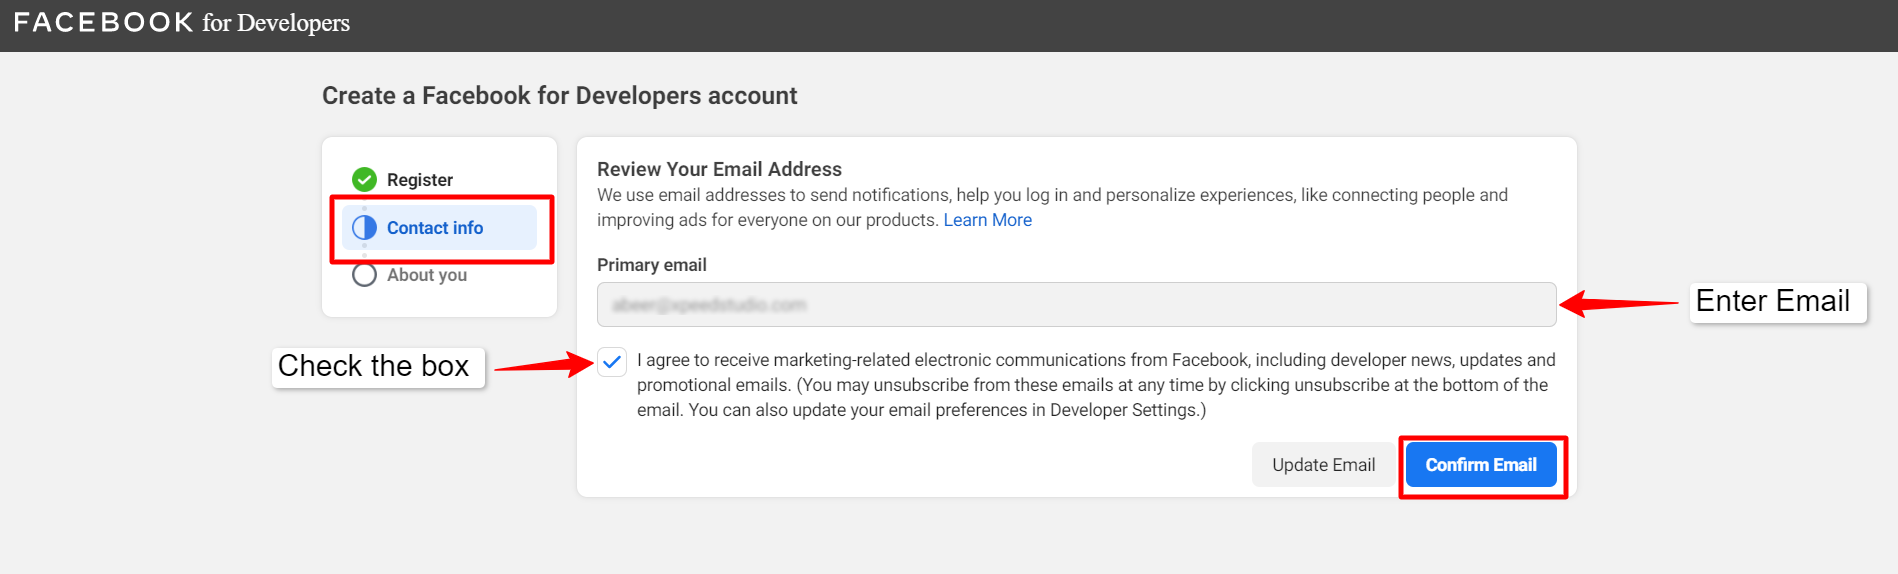 Email confirmation for Facebook developers account